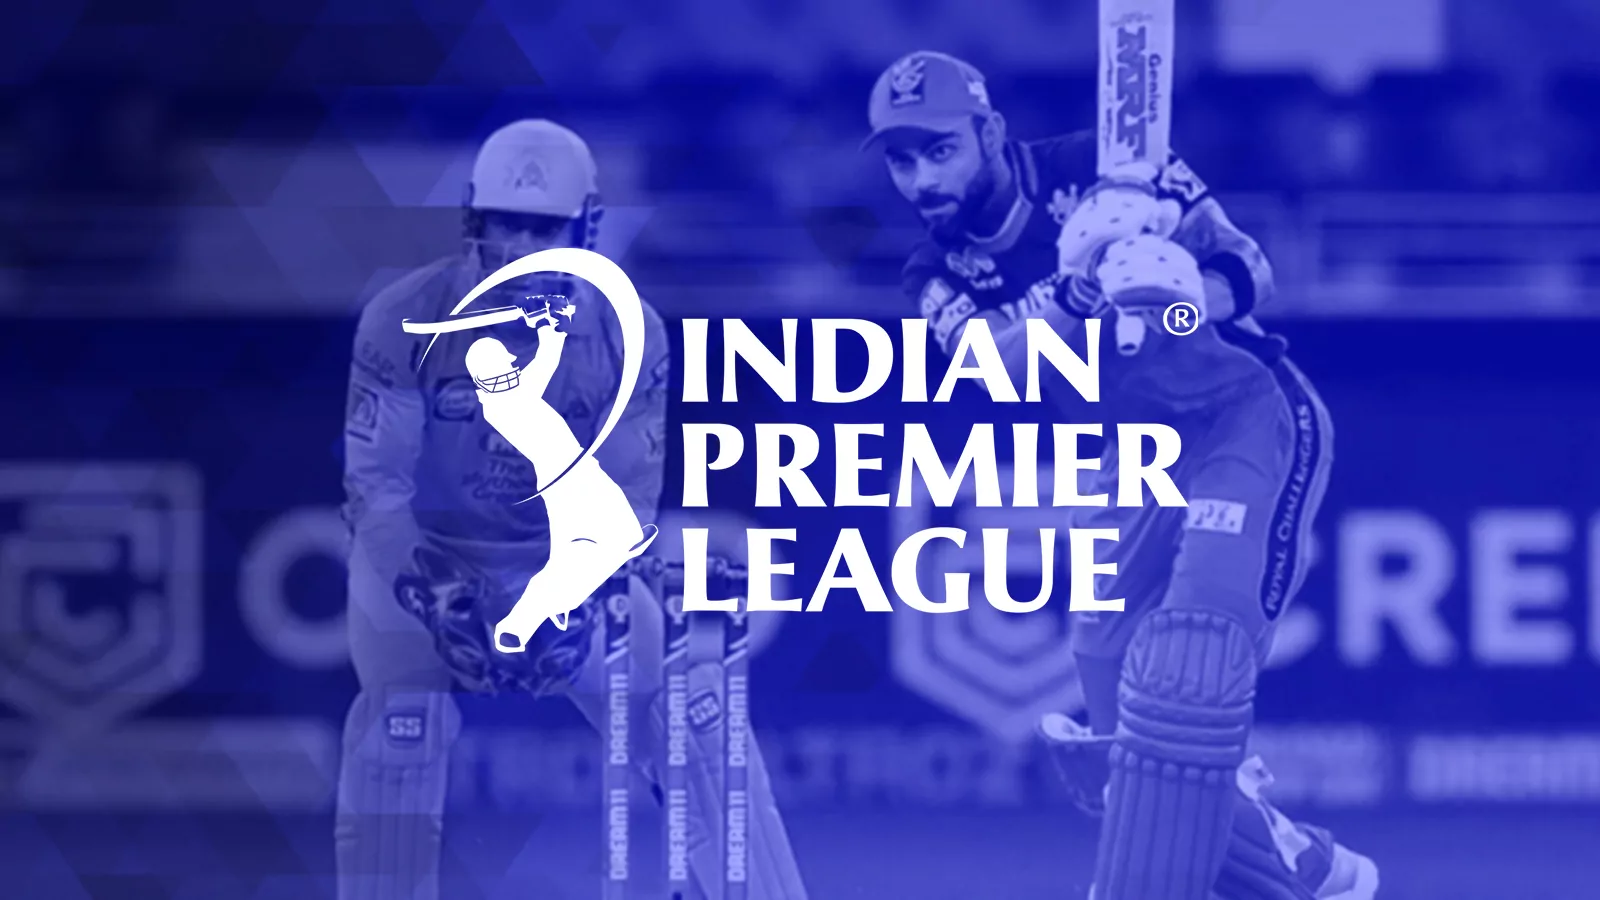 Use our free betting tips to win more with betting on IPL cricket matches.